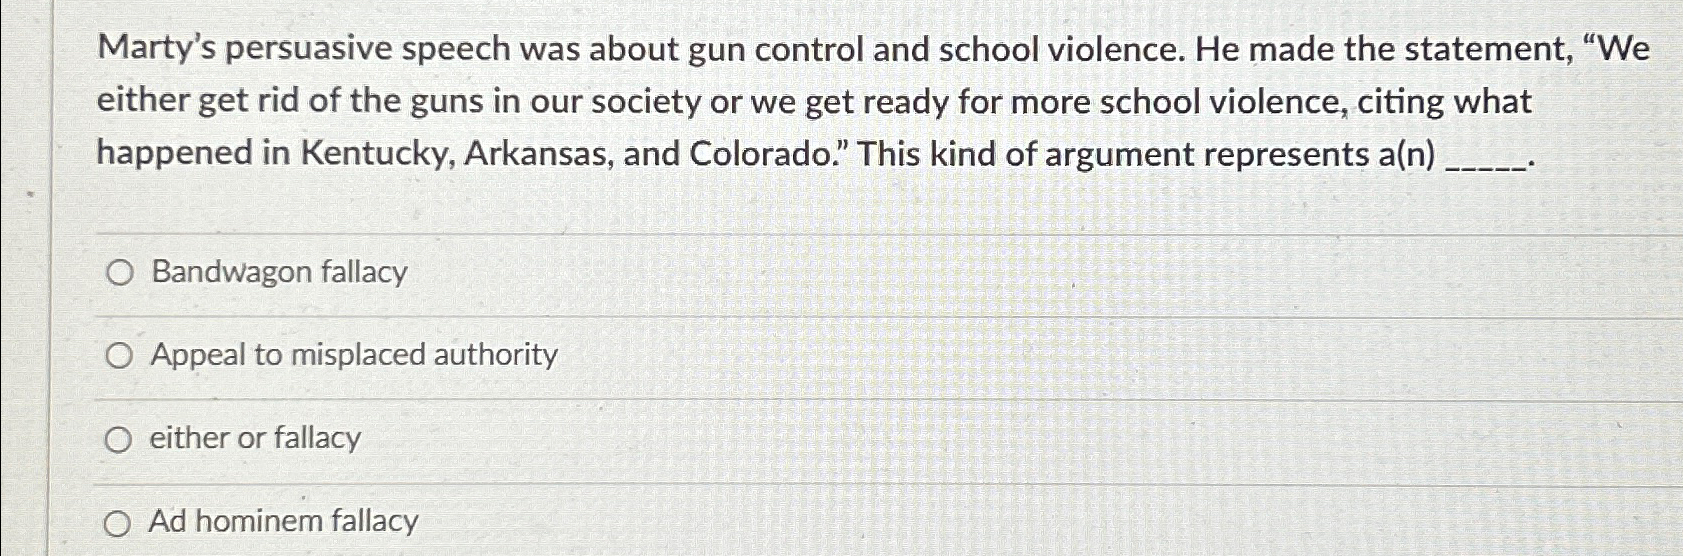 marty's persuasive speech was about gun control and school violence